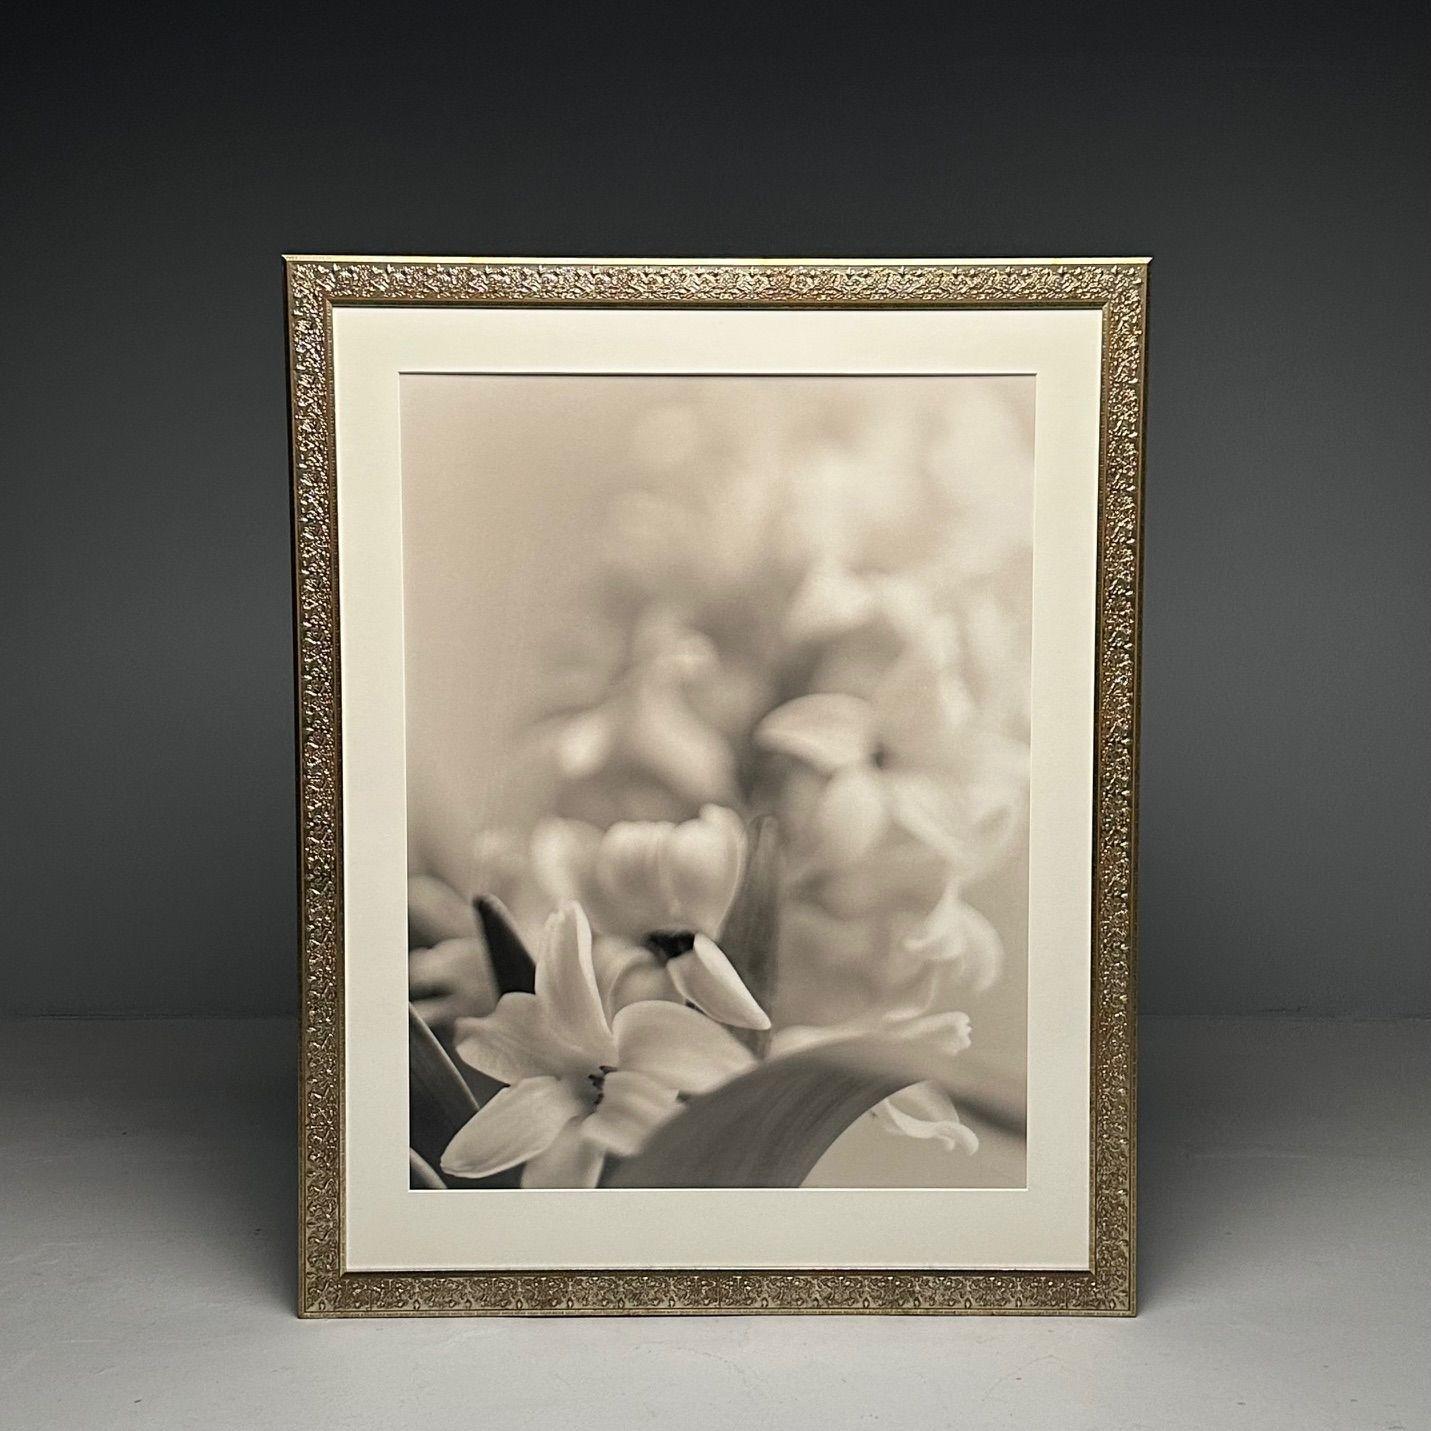 Modern, Large Black and White Photographs, Floral Still Life, Framed, 1990s

Five large floral still life framed photographs from the Avon Corporate Collection. Price is for each individual piece - all five framed works are currently